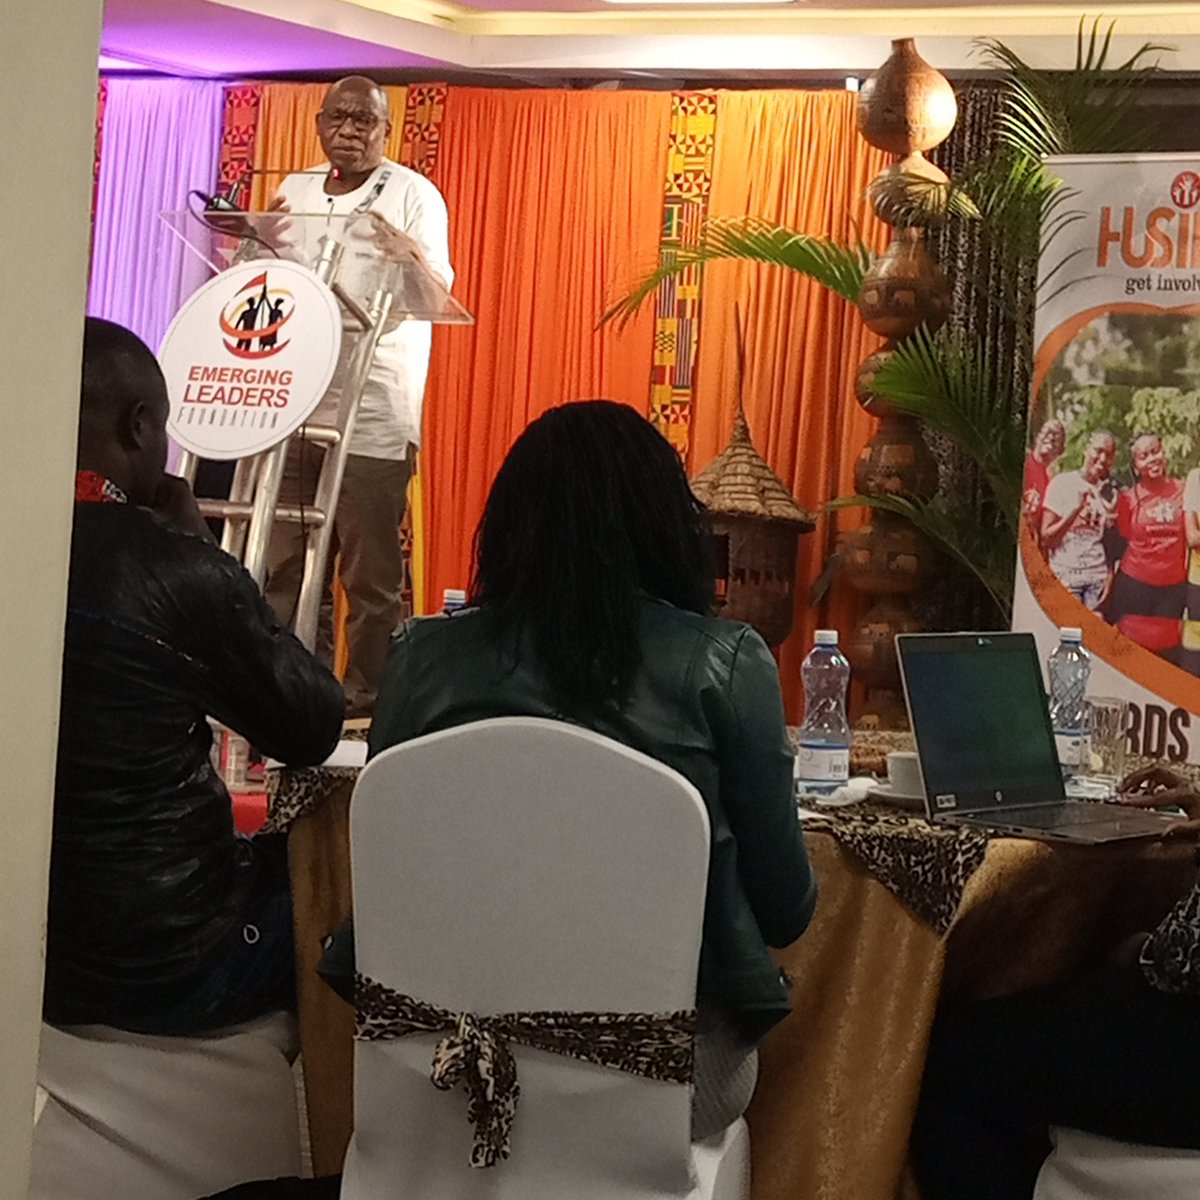 Learning to work outside your age bracket with everyone is the power we as the young people can harness to change the world and understand how the world work..George Kegoro..
#Nimehusika
#Inclusivity4All
@elfafrica1 
@OpenSocietyEA 
@voicetweetz 
@Jacaranda1